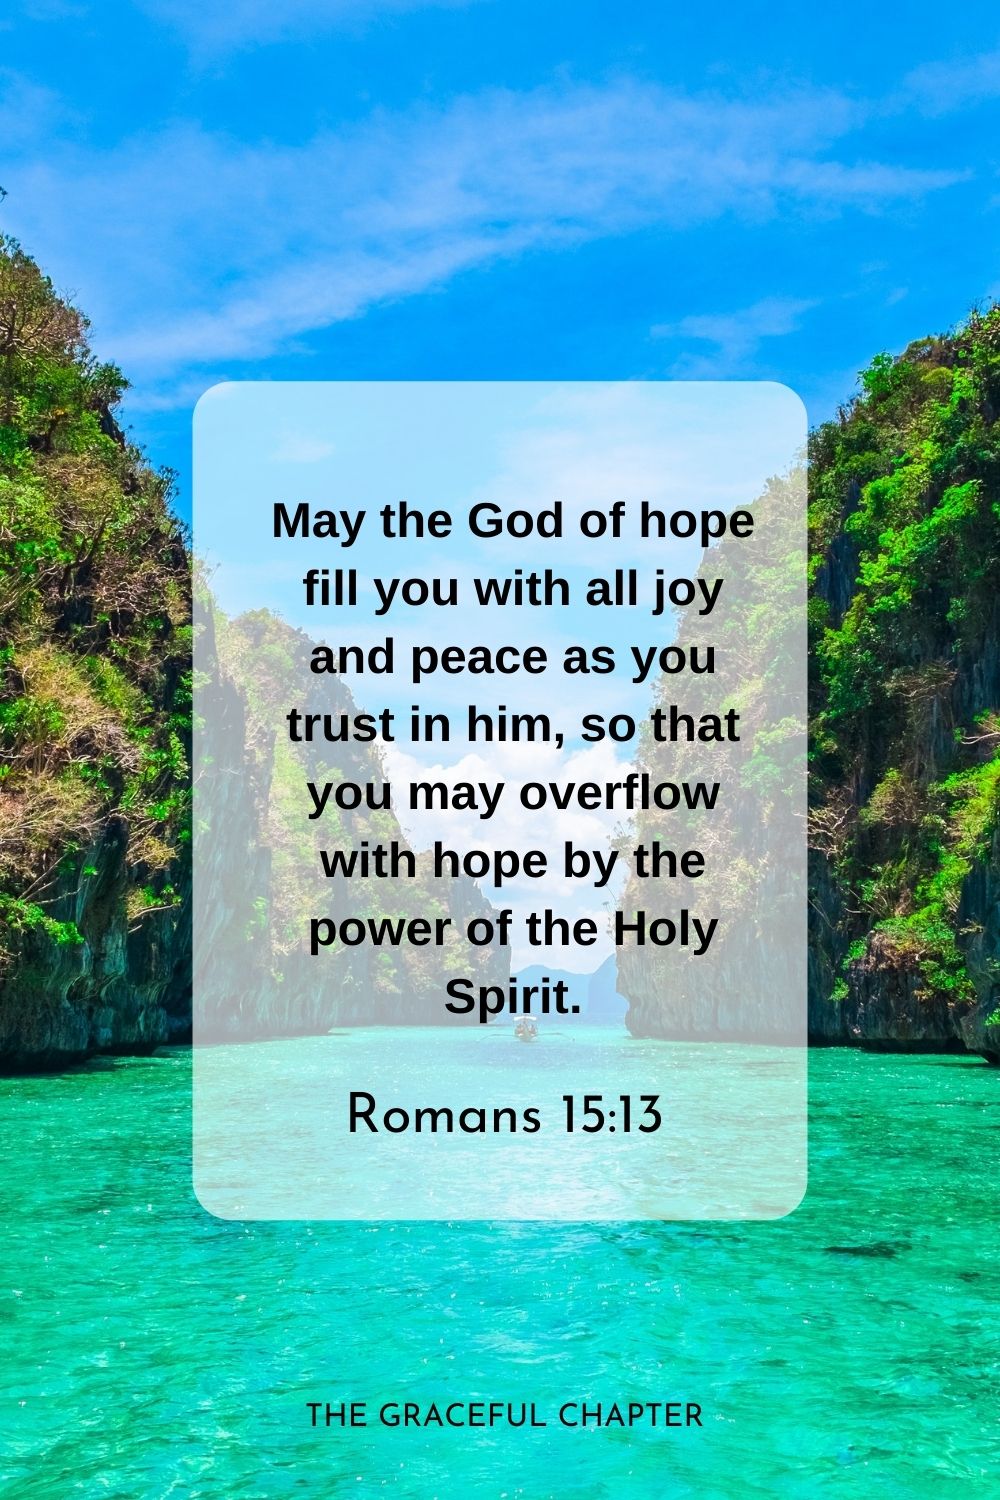 May the God of hope fill you with all joy and peace as you trust in him, so that you may overflow with hope by the power of the Holy Spirit.